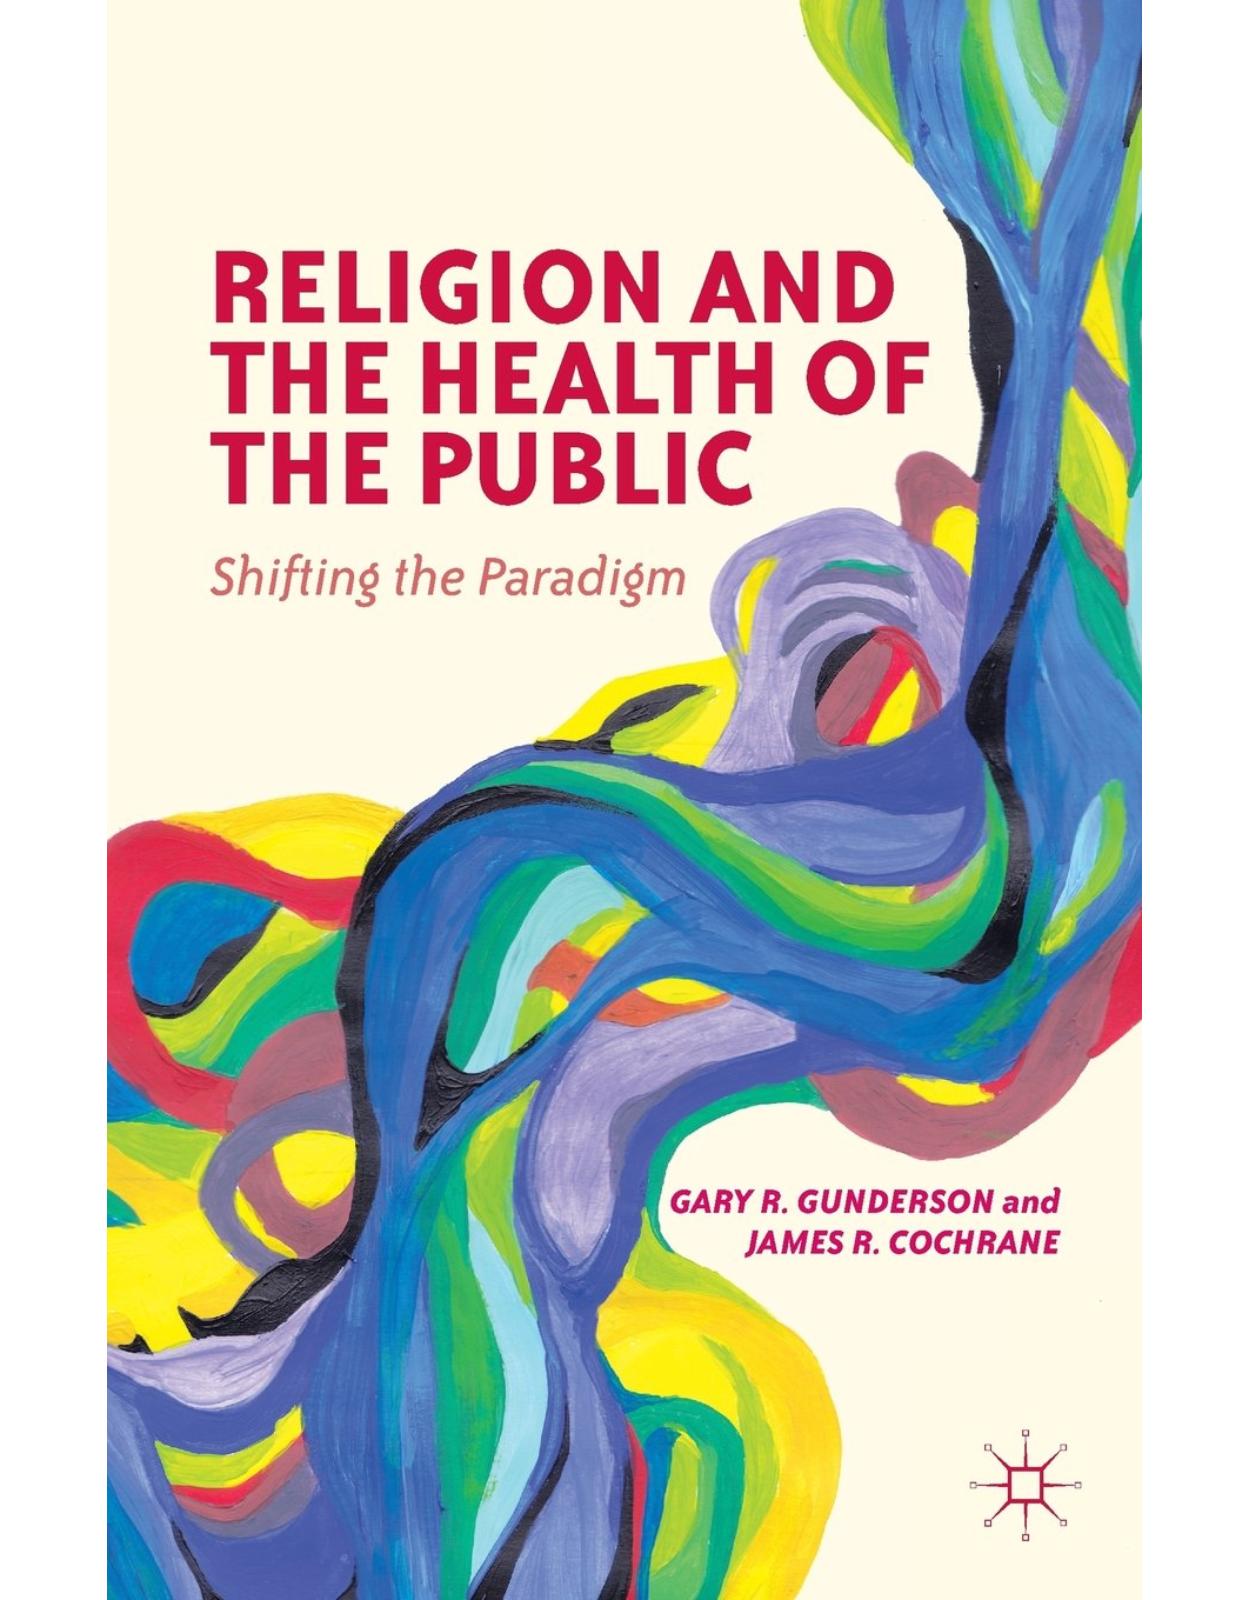 Religion and the Health of the Public: Shifting the Paradigm